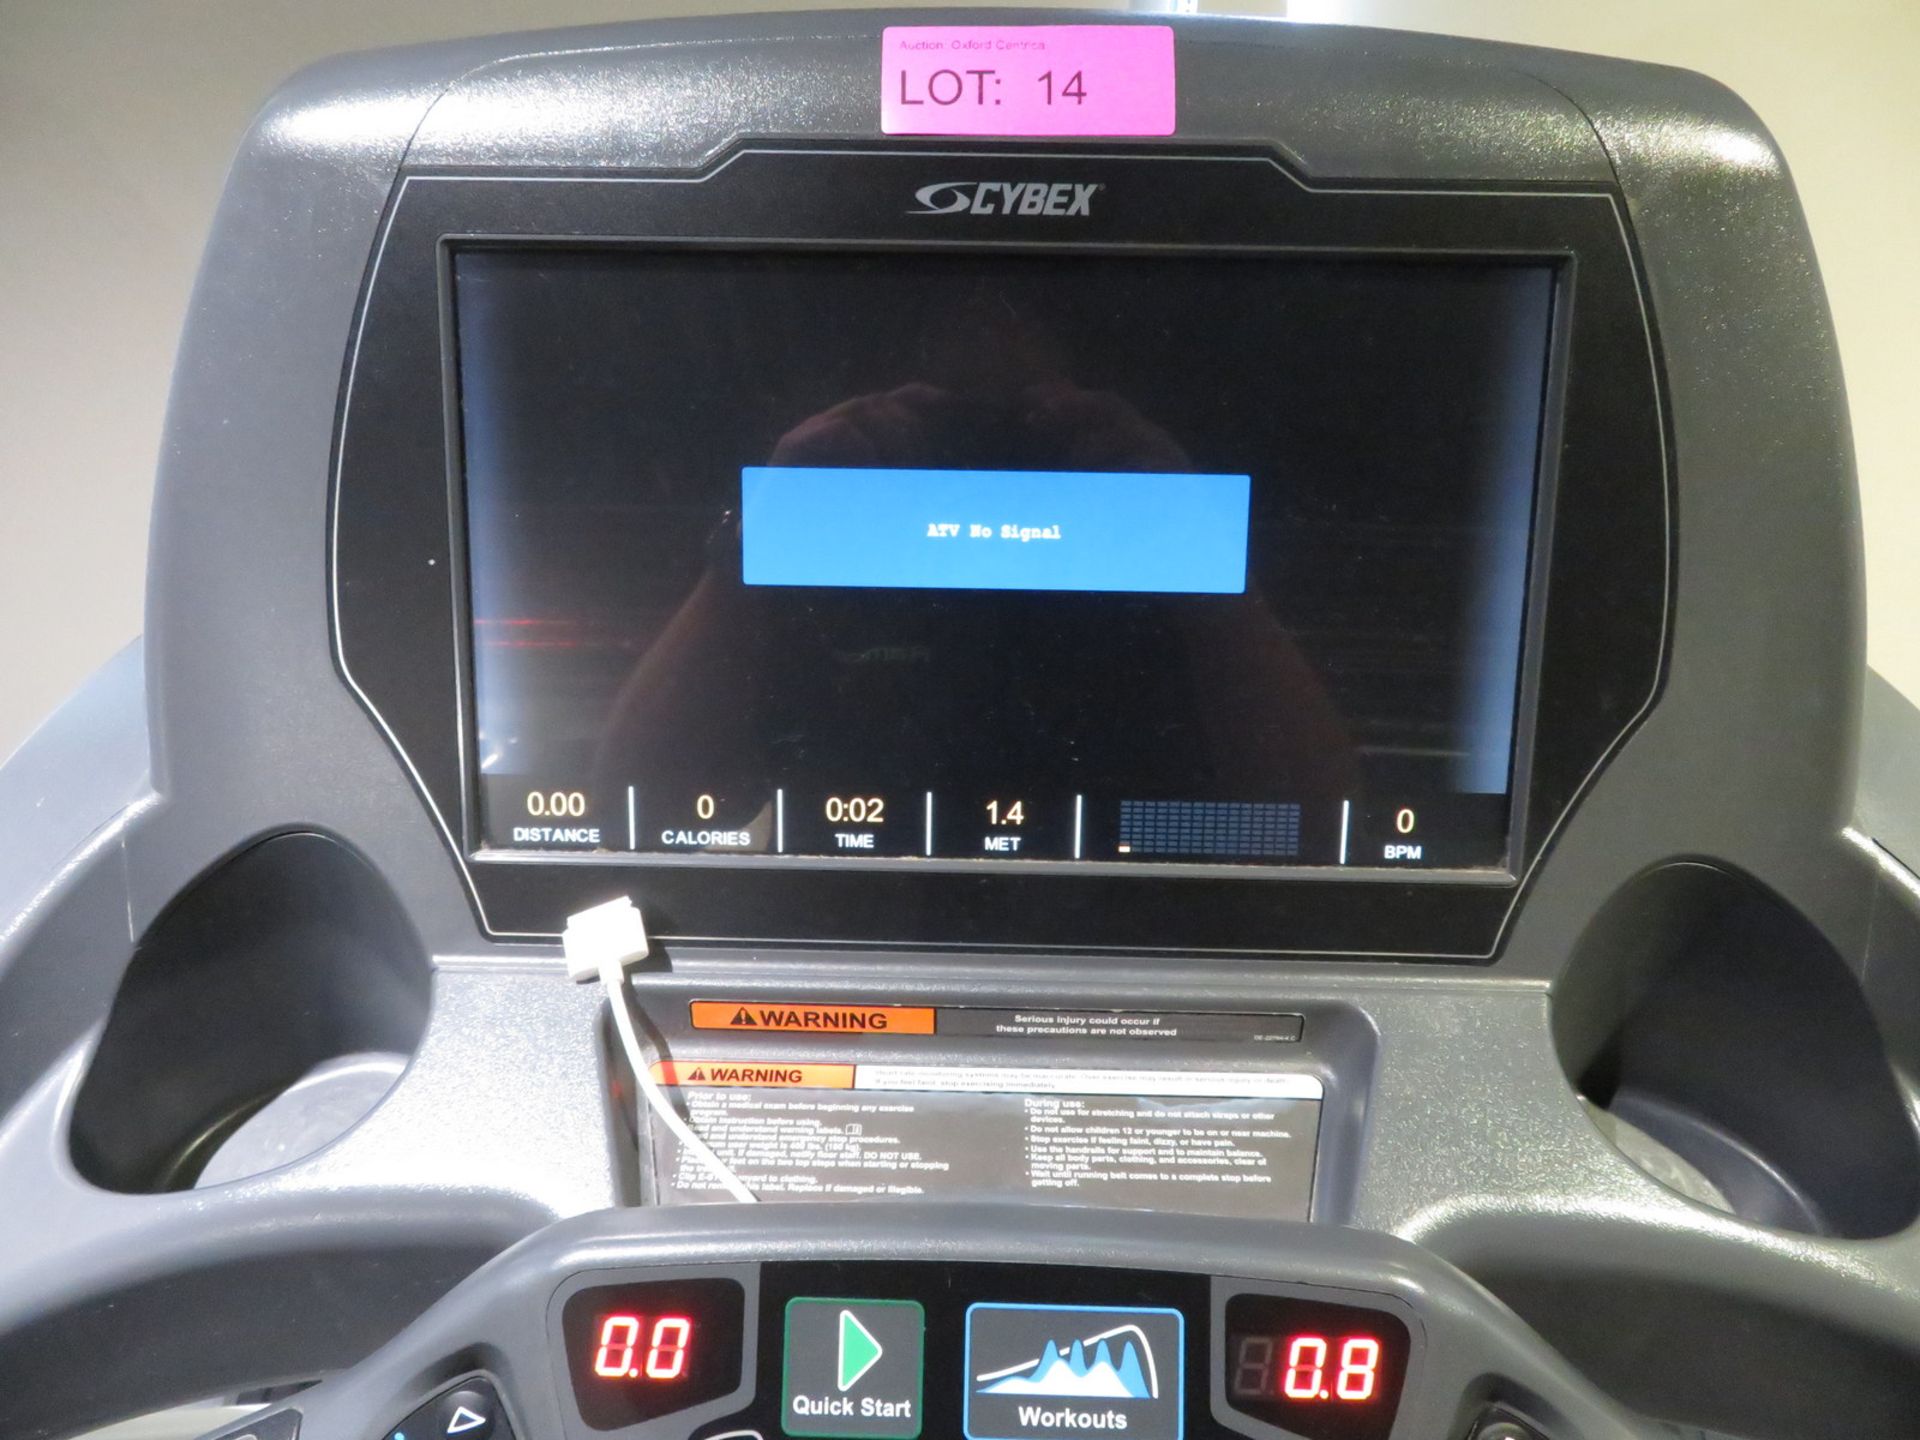 Cybex Treadmill Model: 625T, Working Condition With TV Display Monitor. - Image 7 of 9